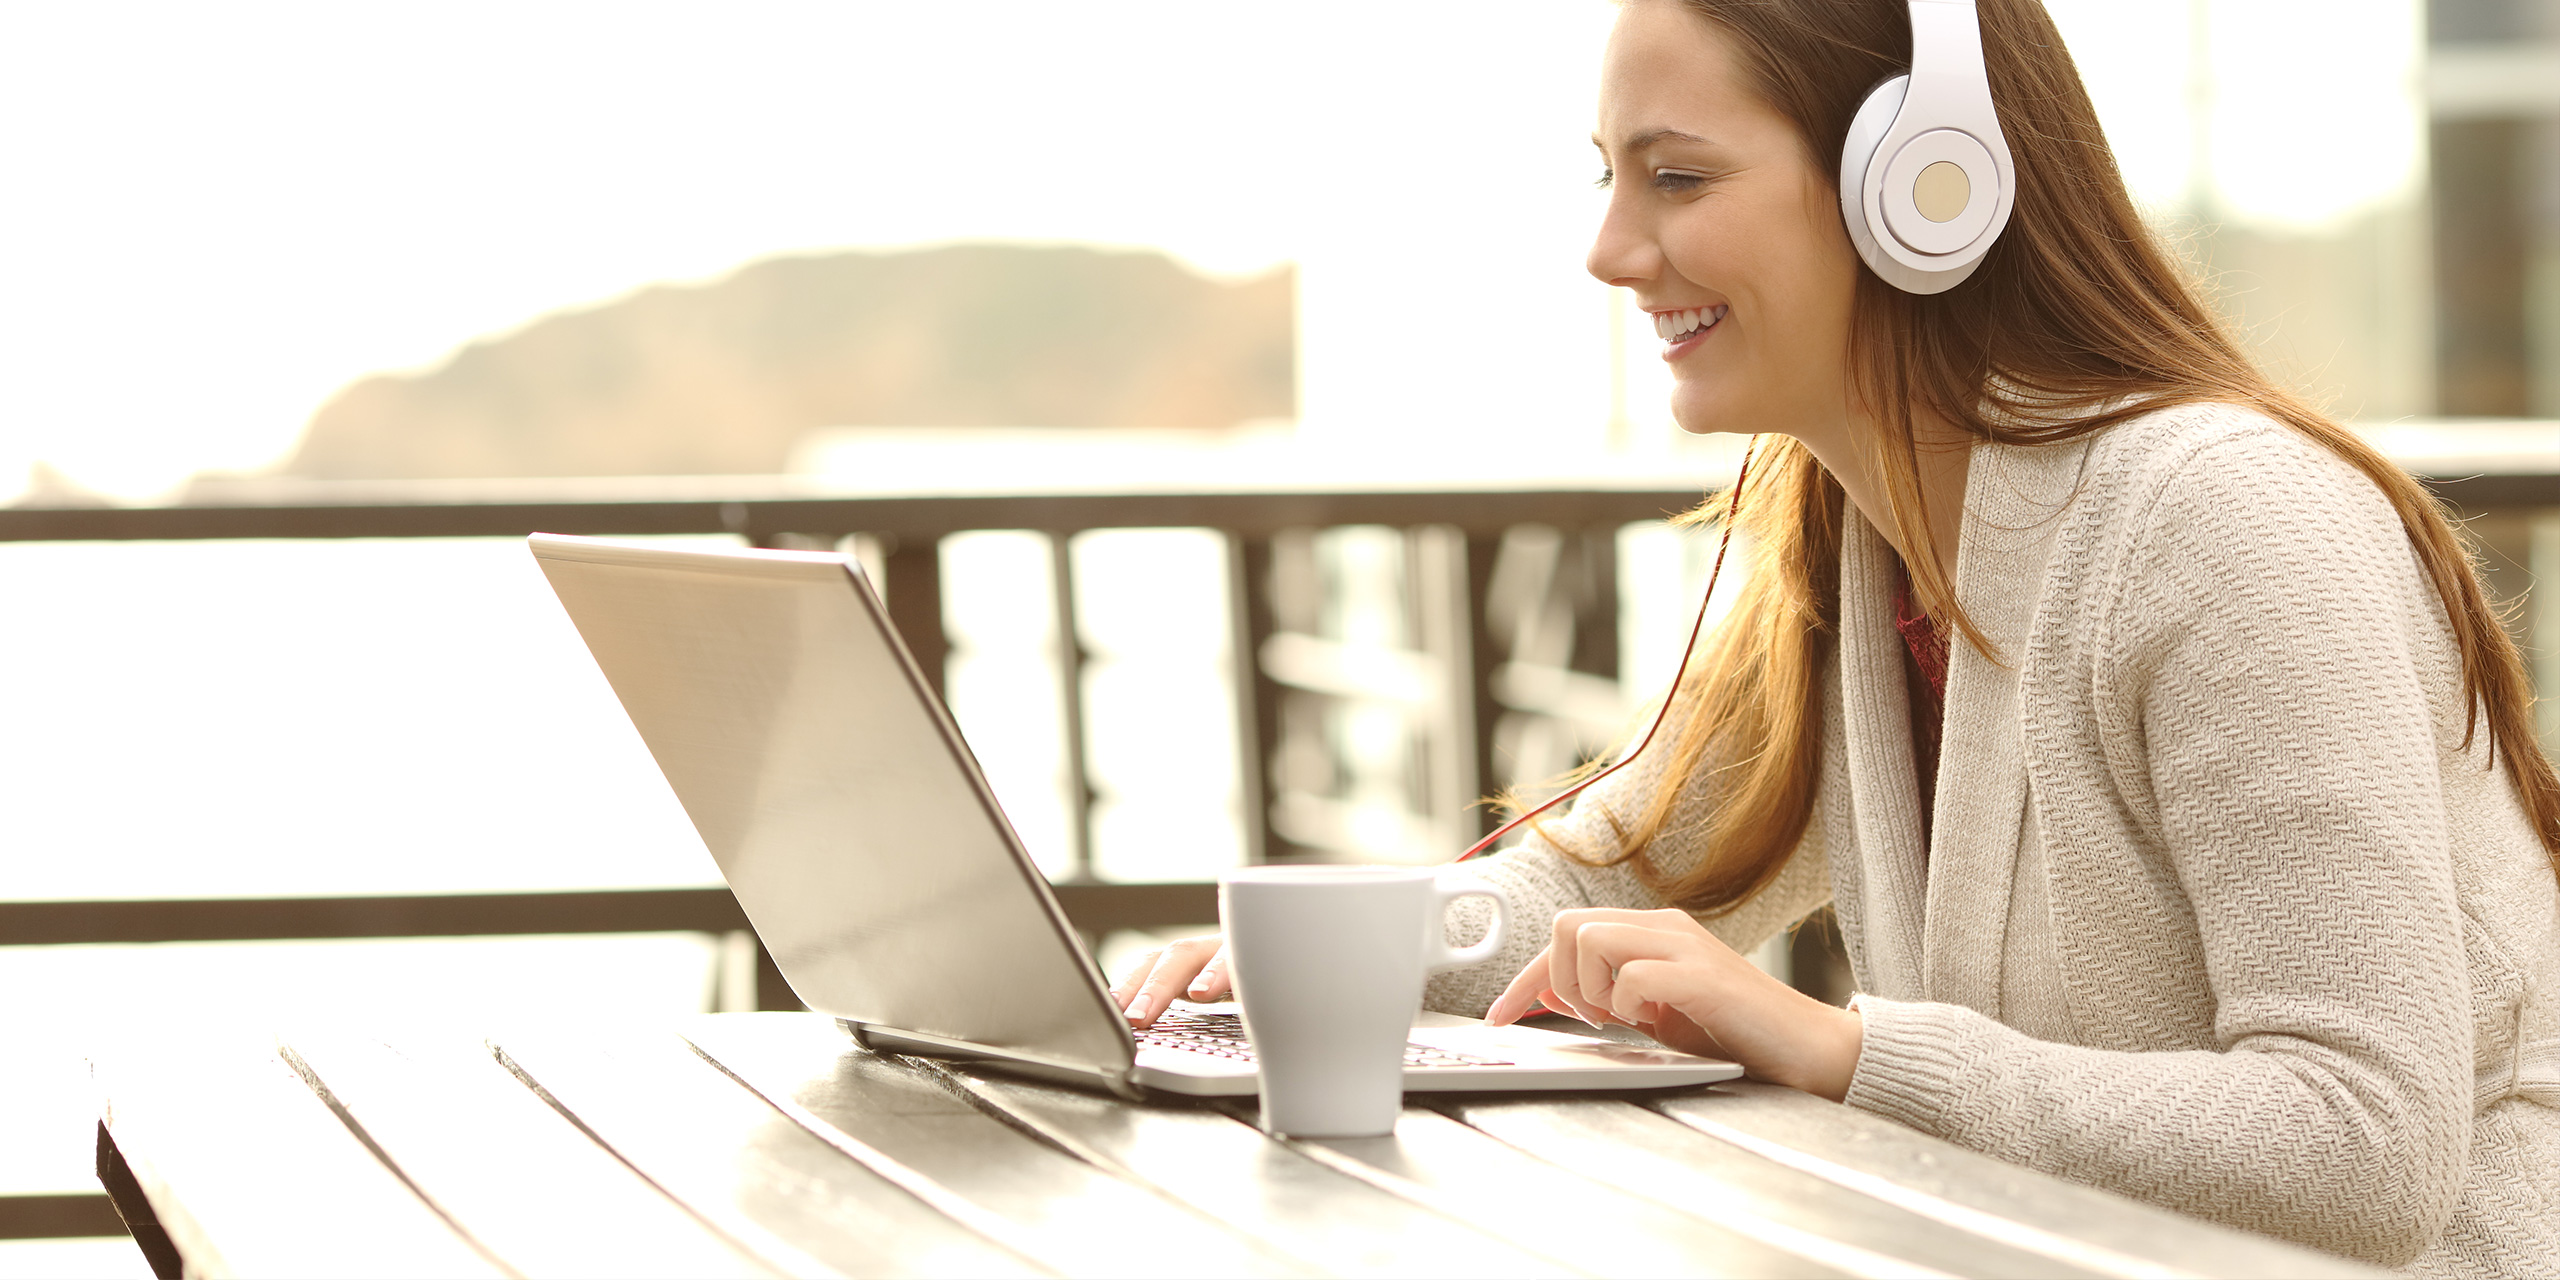 teenager using laptop and headphones on vacation; Courtesy of Antonio Guillem/Shutterstock